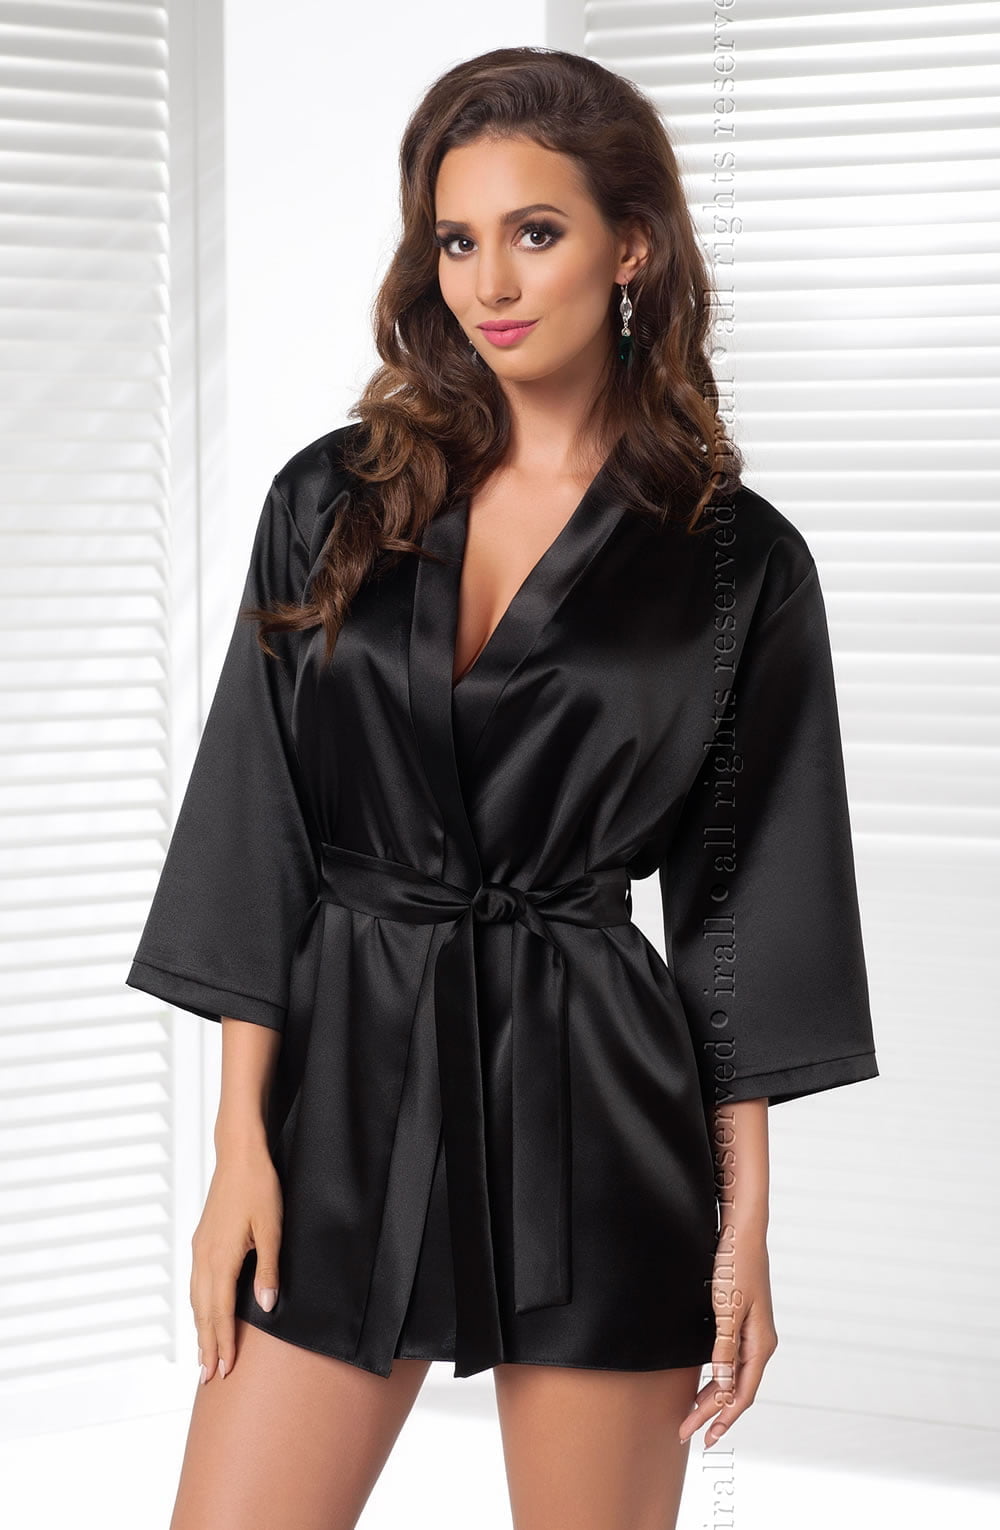 Vibrators, Sex Toy Kits and Sex Toys at Cloud9Adults - Irall Aria Dressing Gown Black - Buy Sex Toys Online